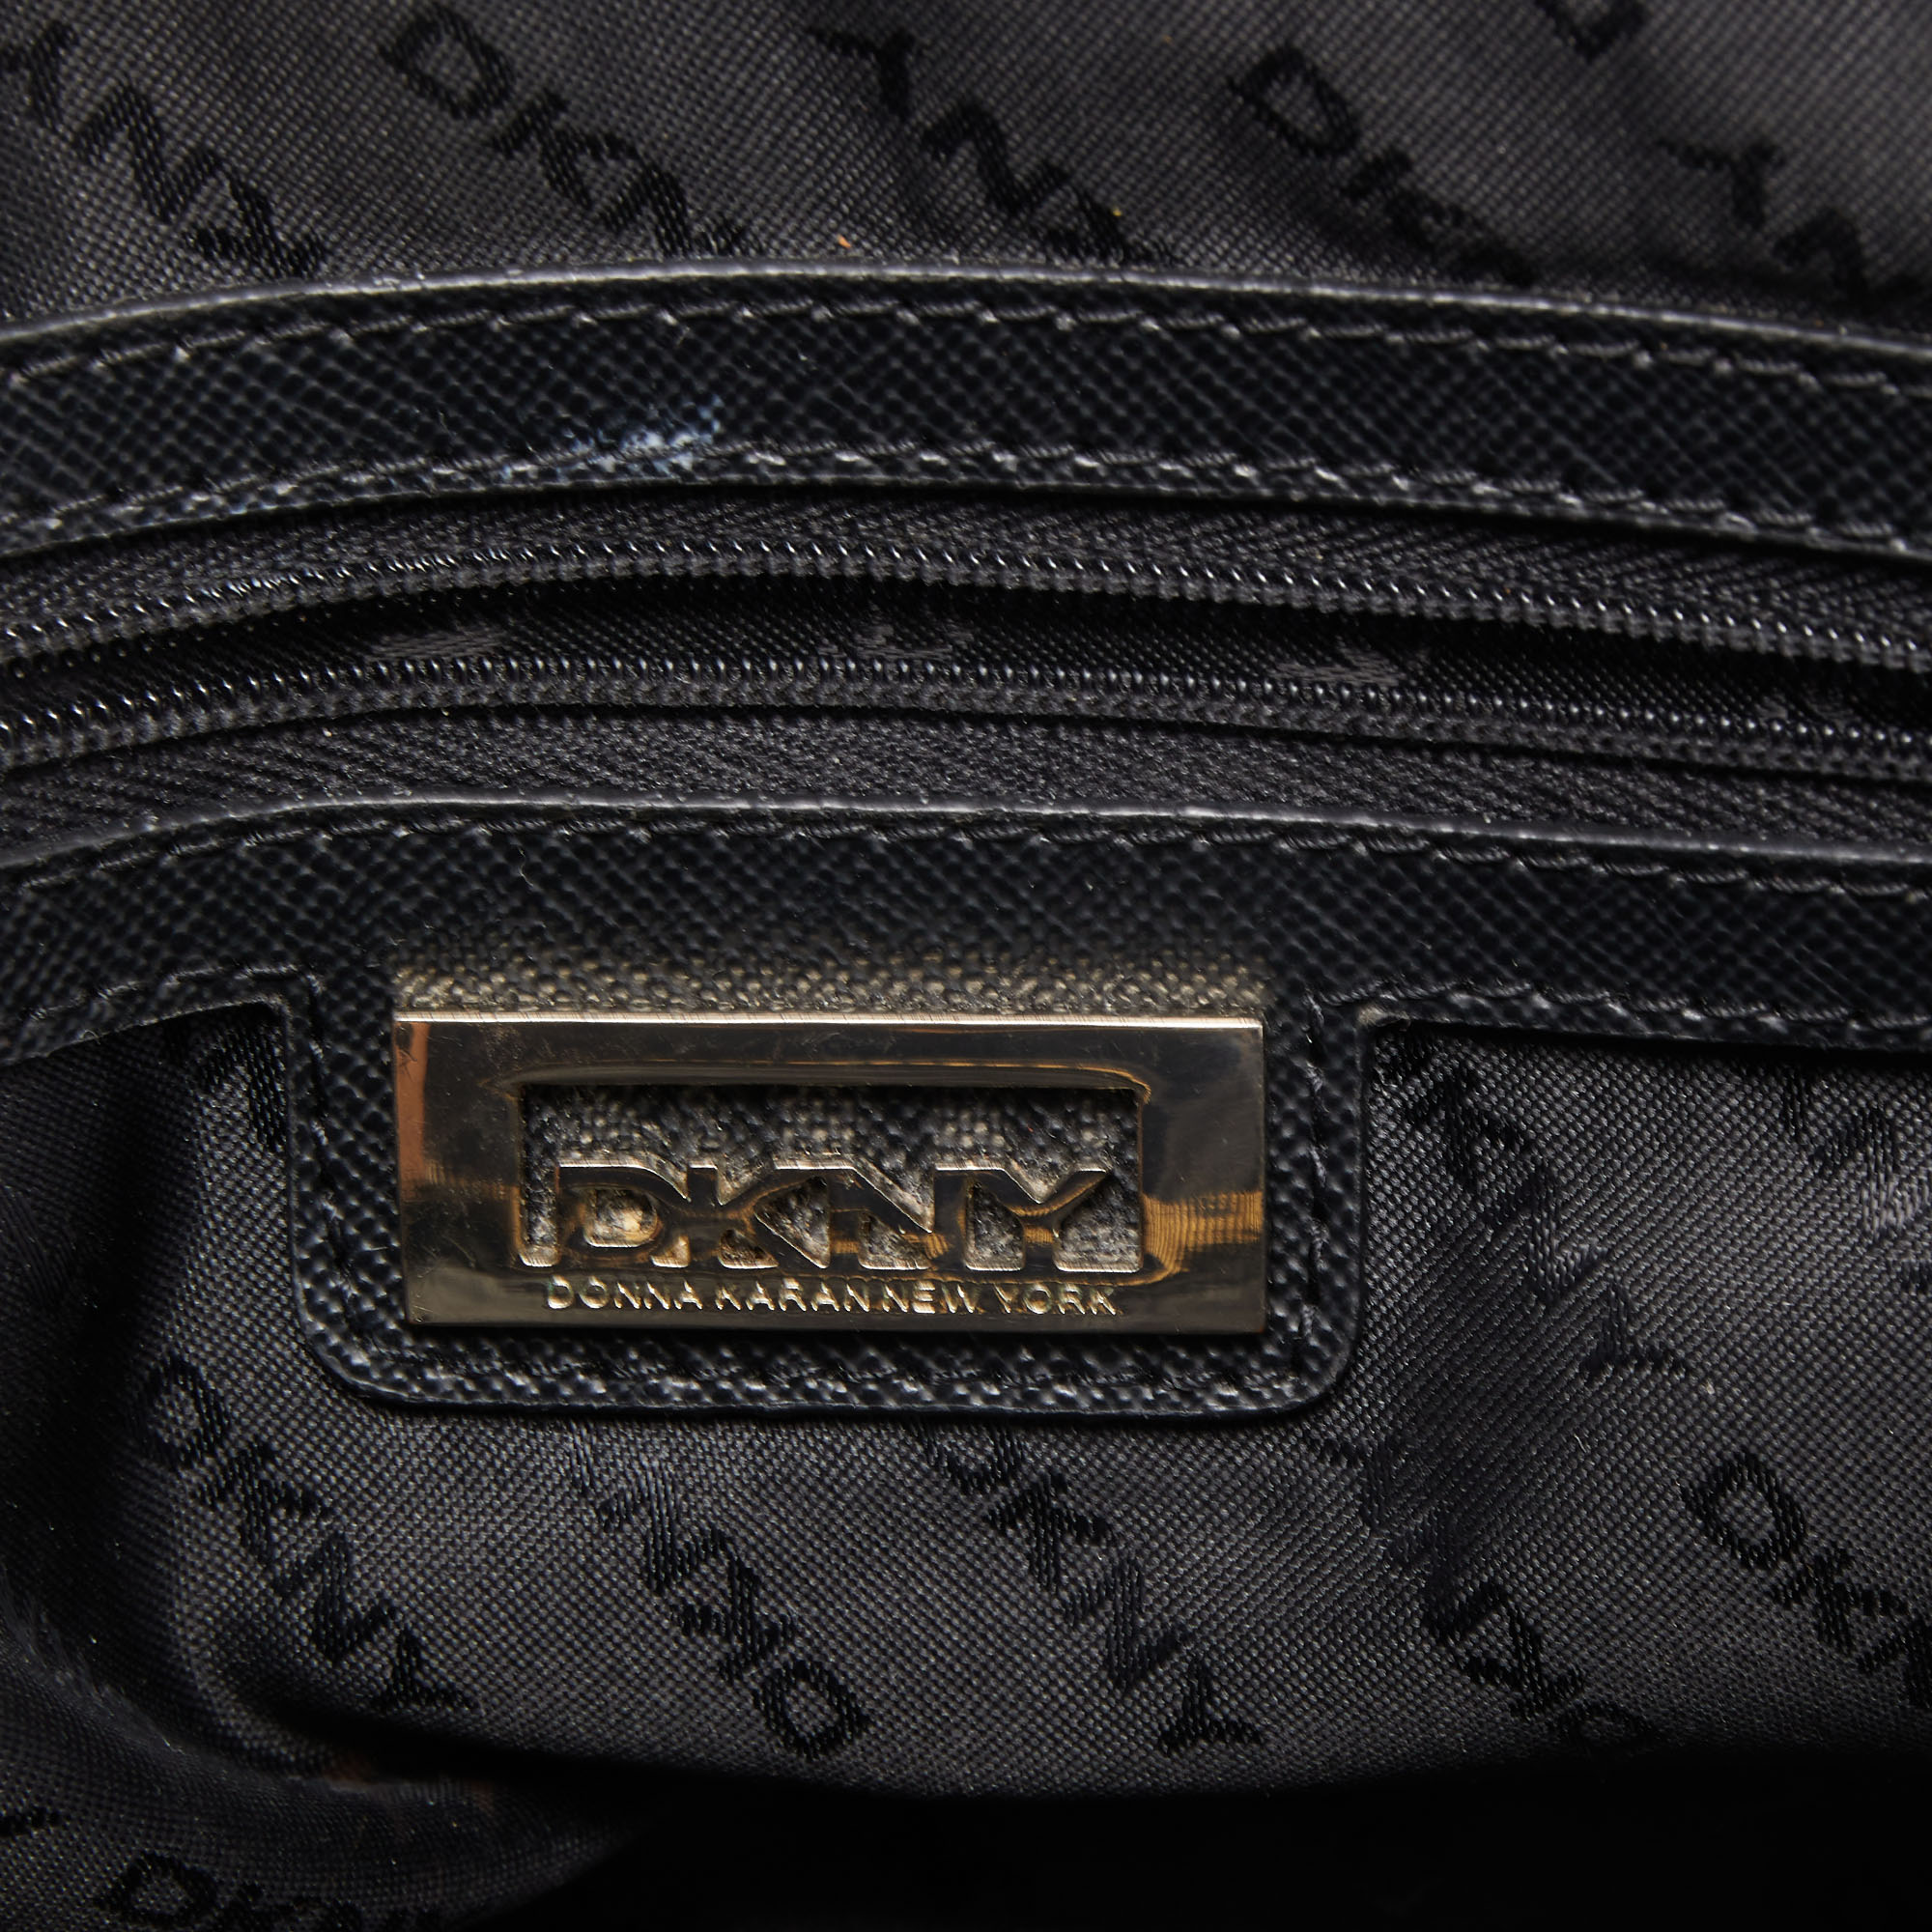 Dkny Grey/Black Monogram Canvas And Leather Dome Satchel